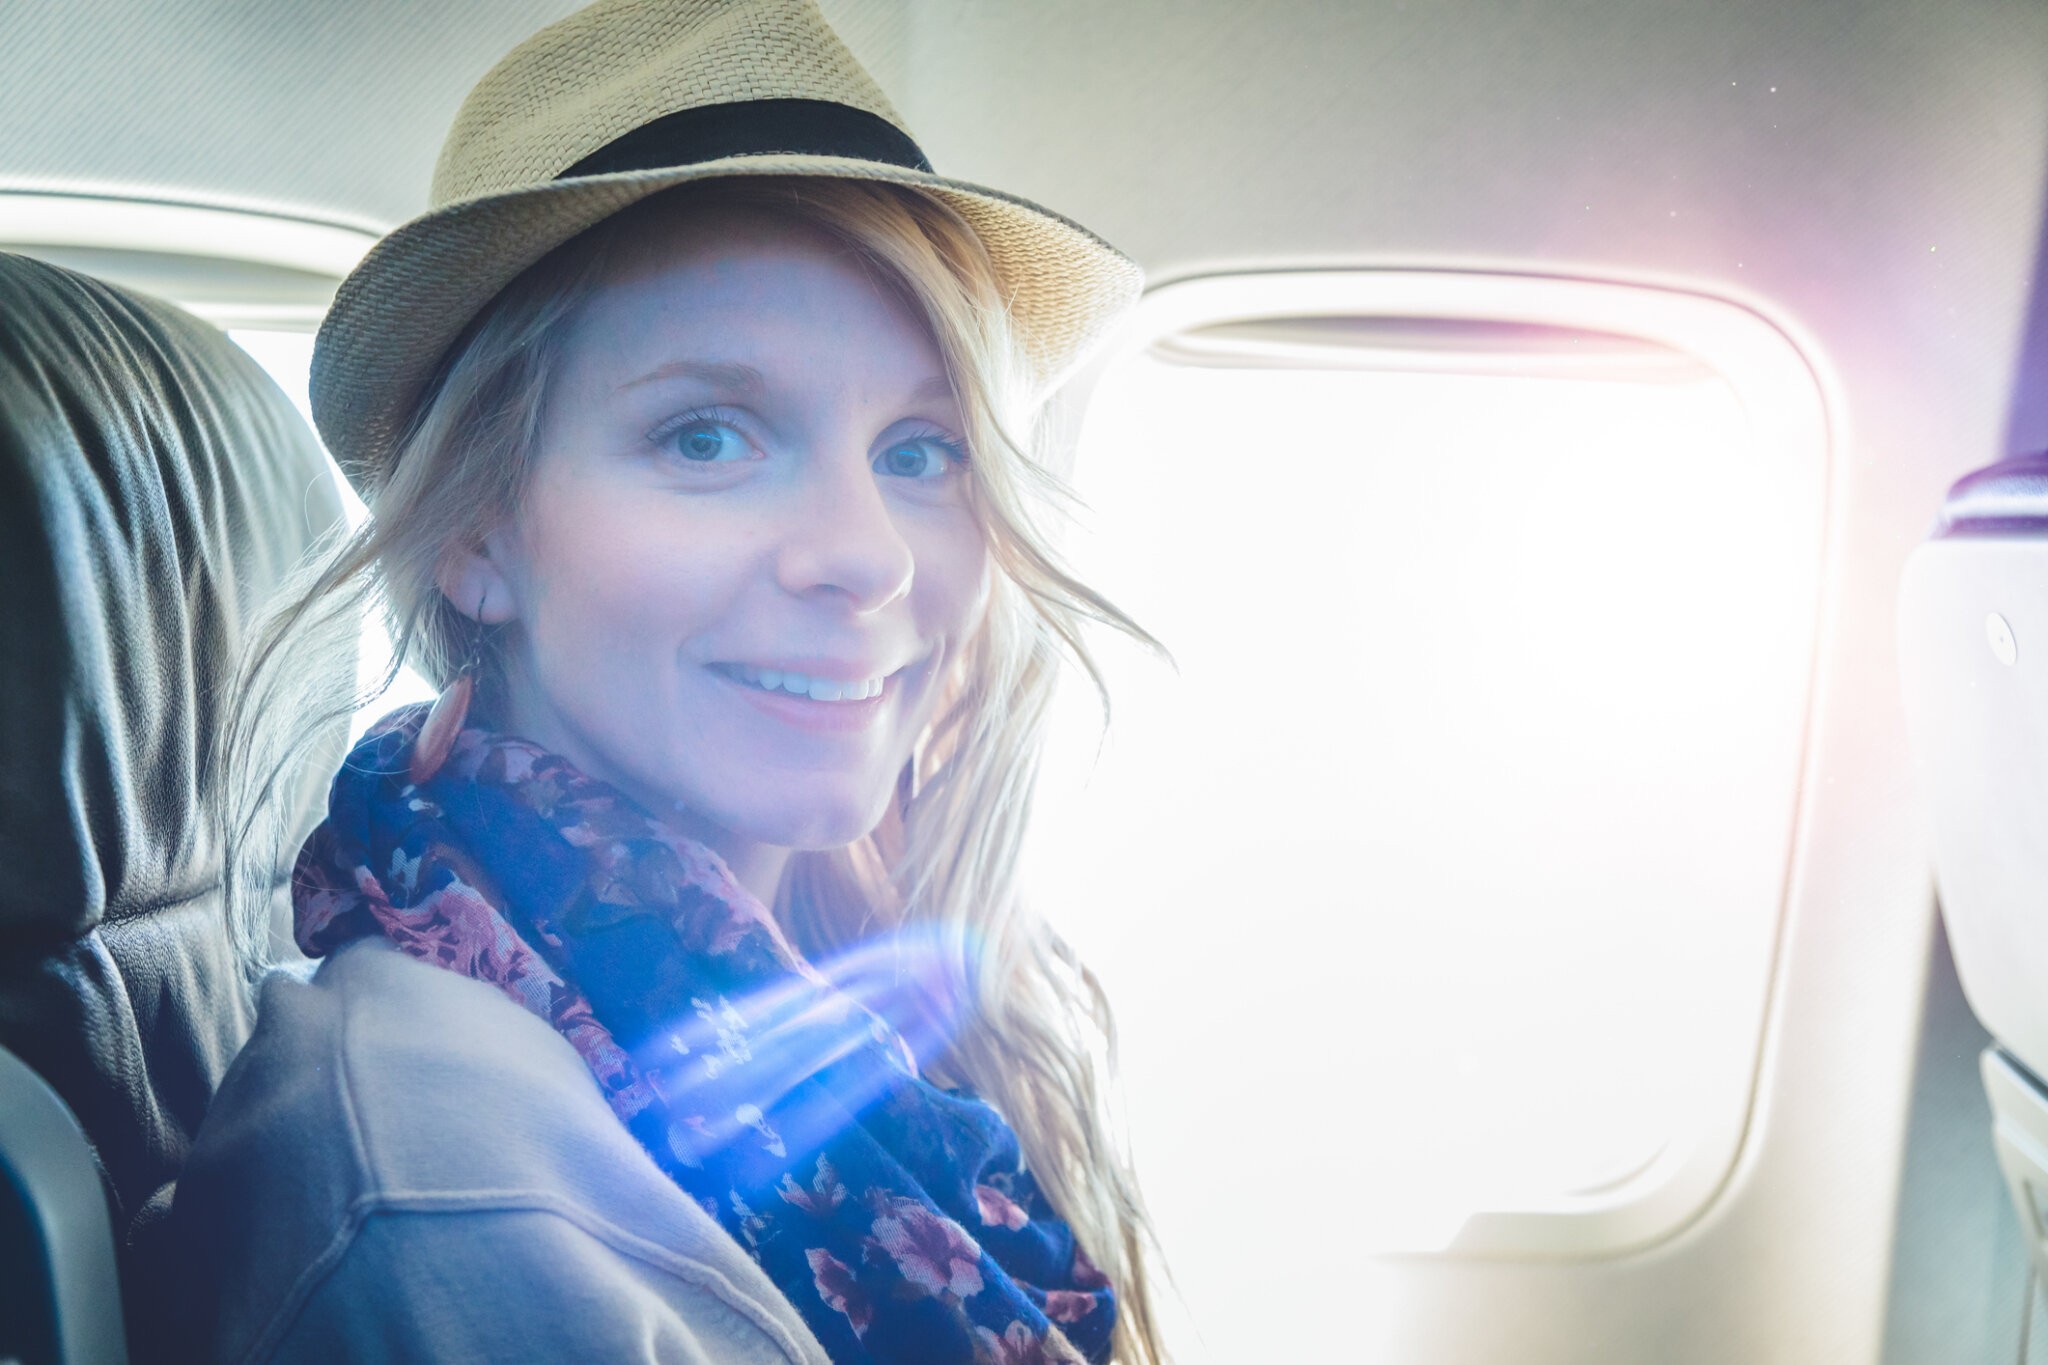 Young Woman Alone Looking Looking at the Camera inside Airplane While Going in Vacation